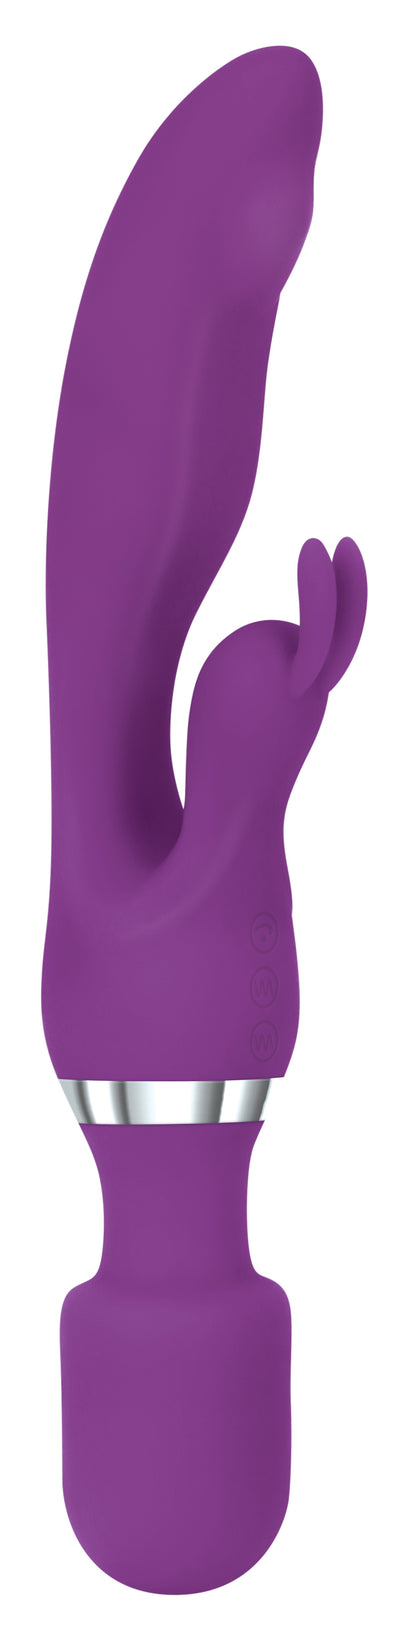 Double the Pleasure with our Rechargeable Dual-Ended Silicone Rabbit Vibe + Wand Massager